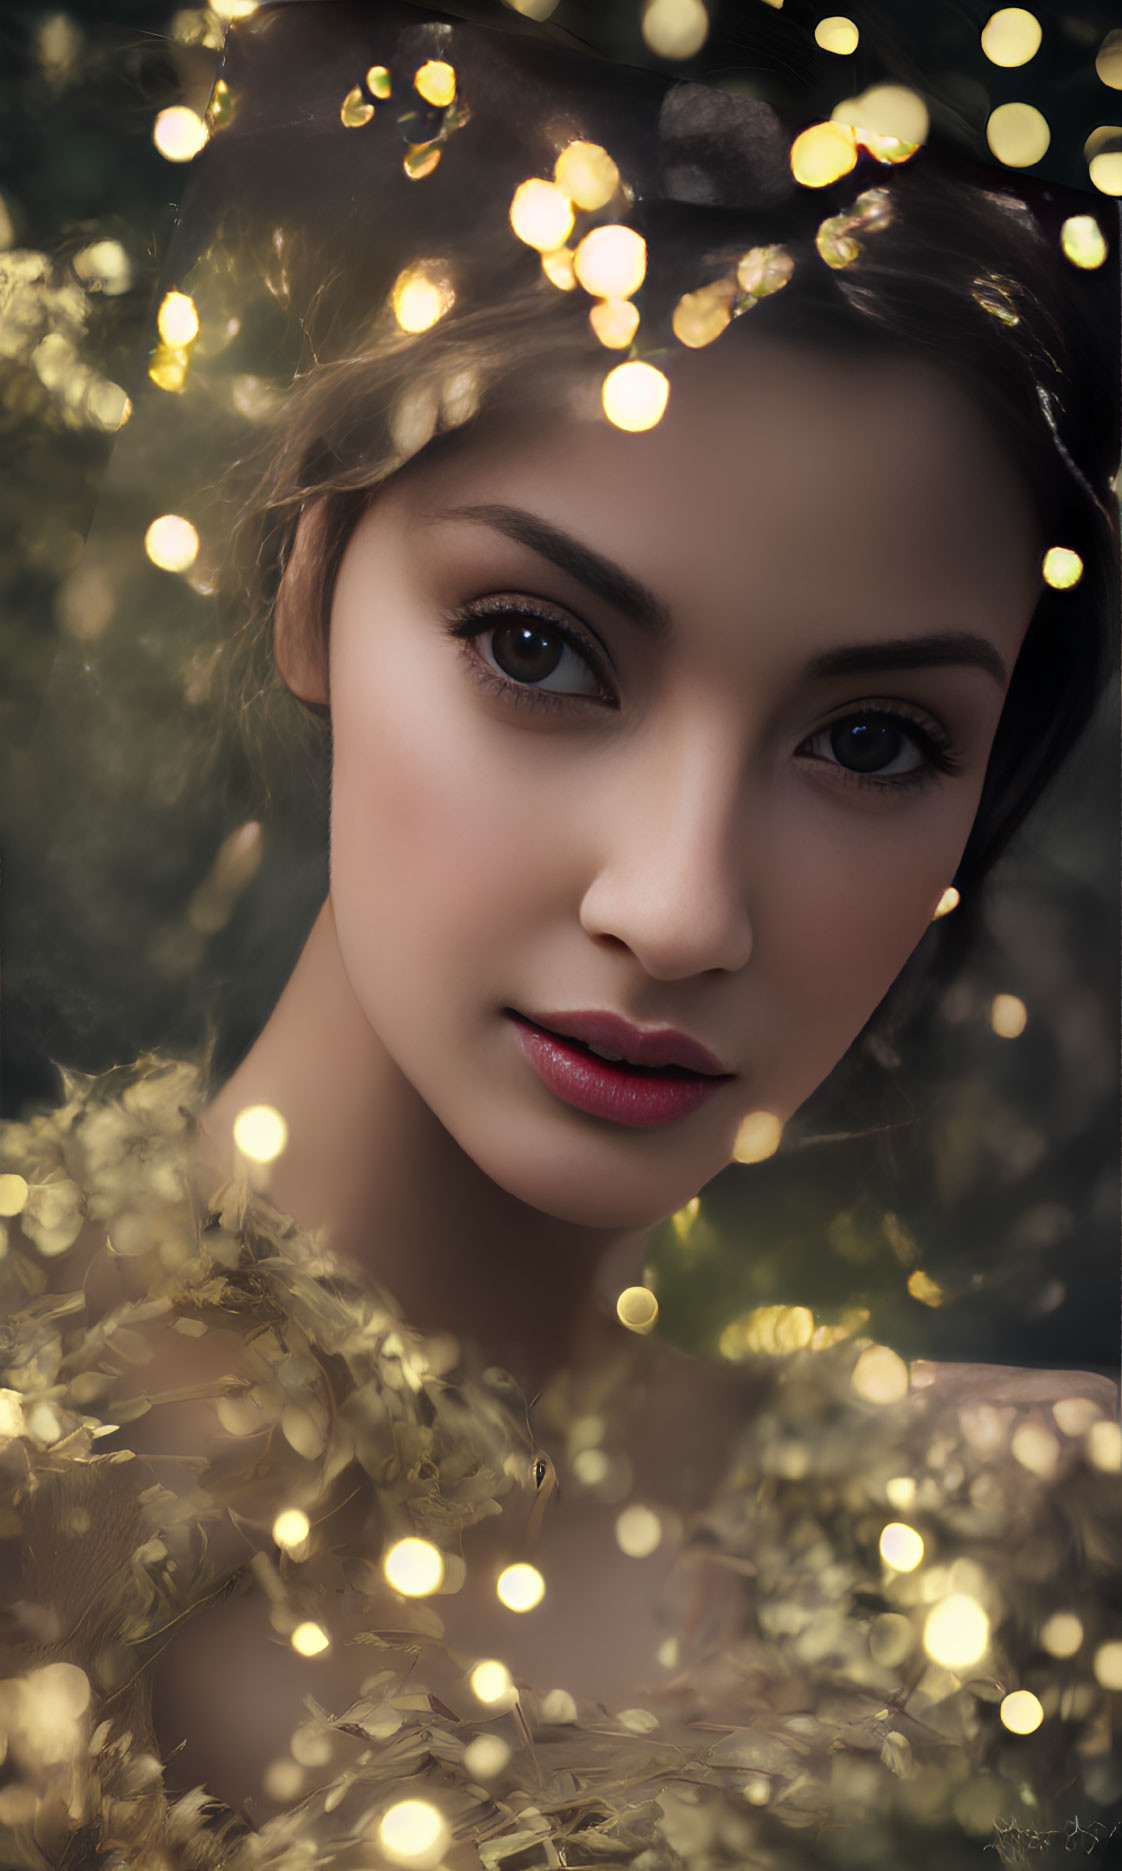 Detailed portrait of a woman with glowing lights and captivating gaze in soft ambiance